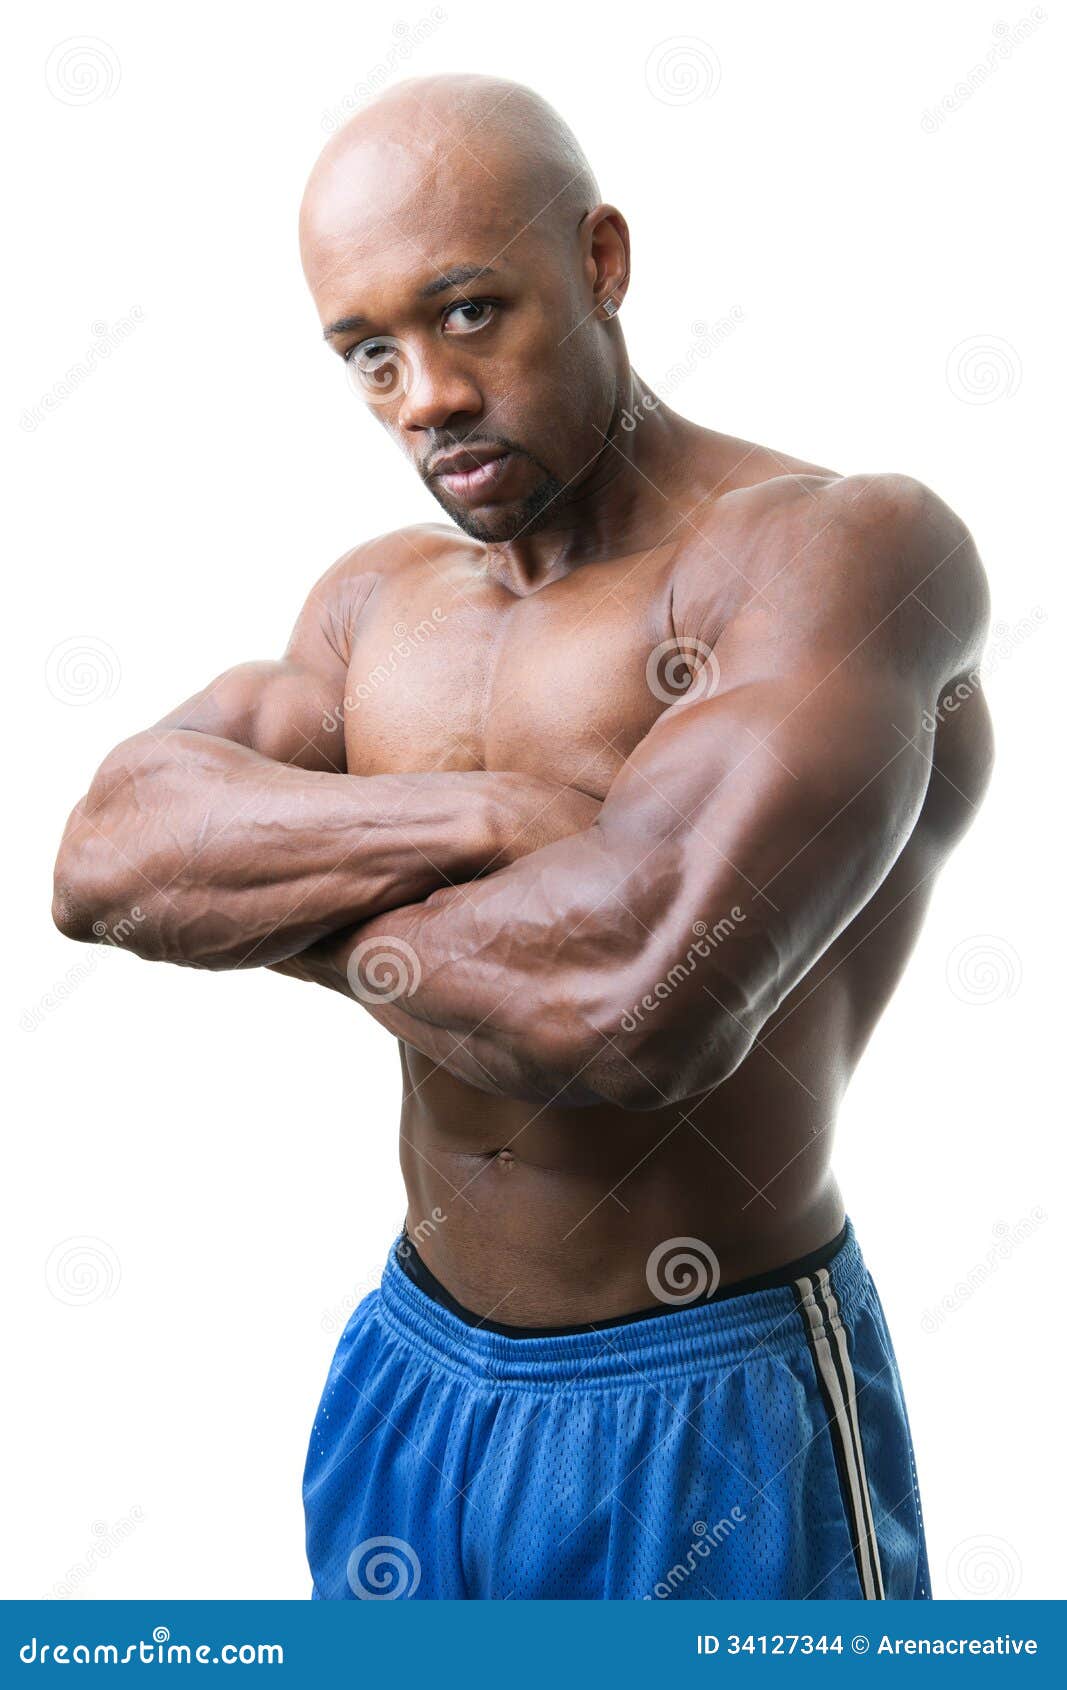 Muscular Man Arms Crossed stock photo. Image of handsome - 34127344